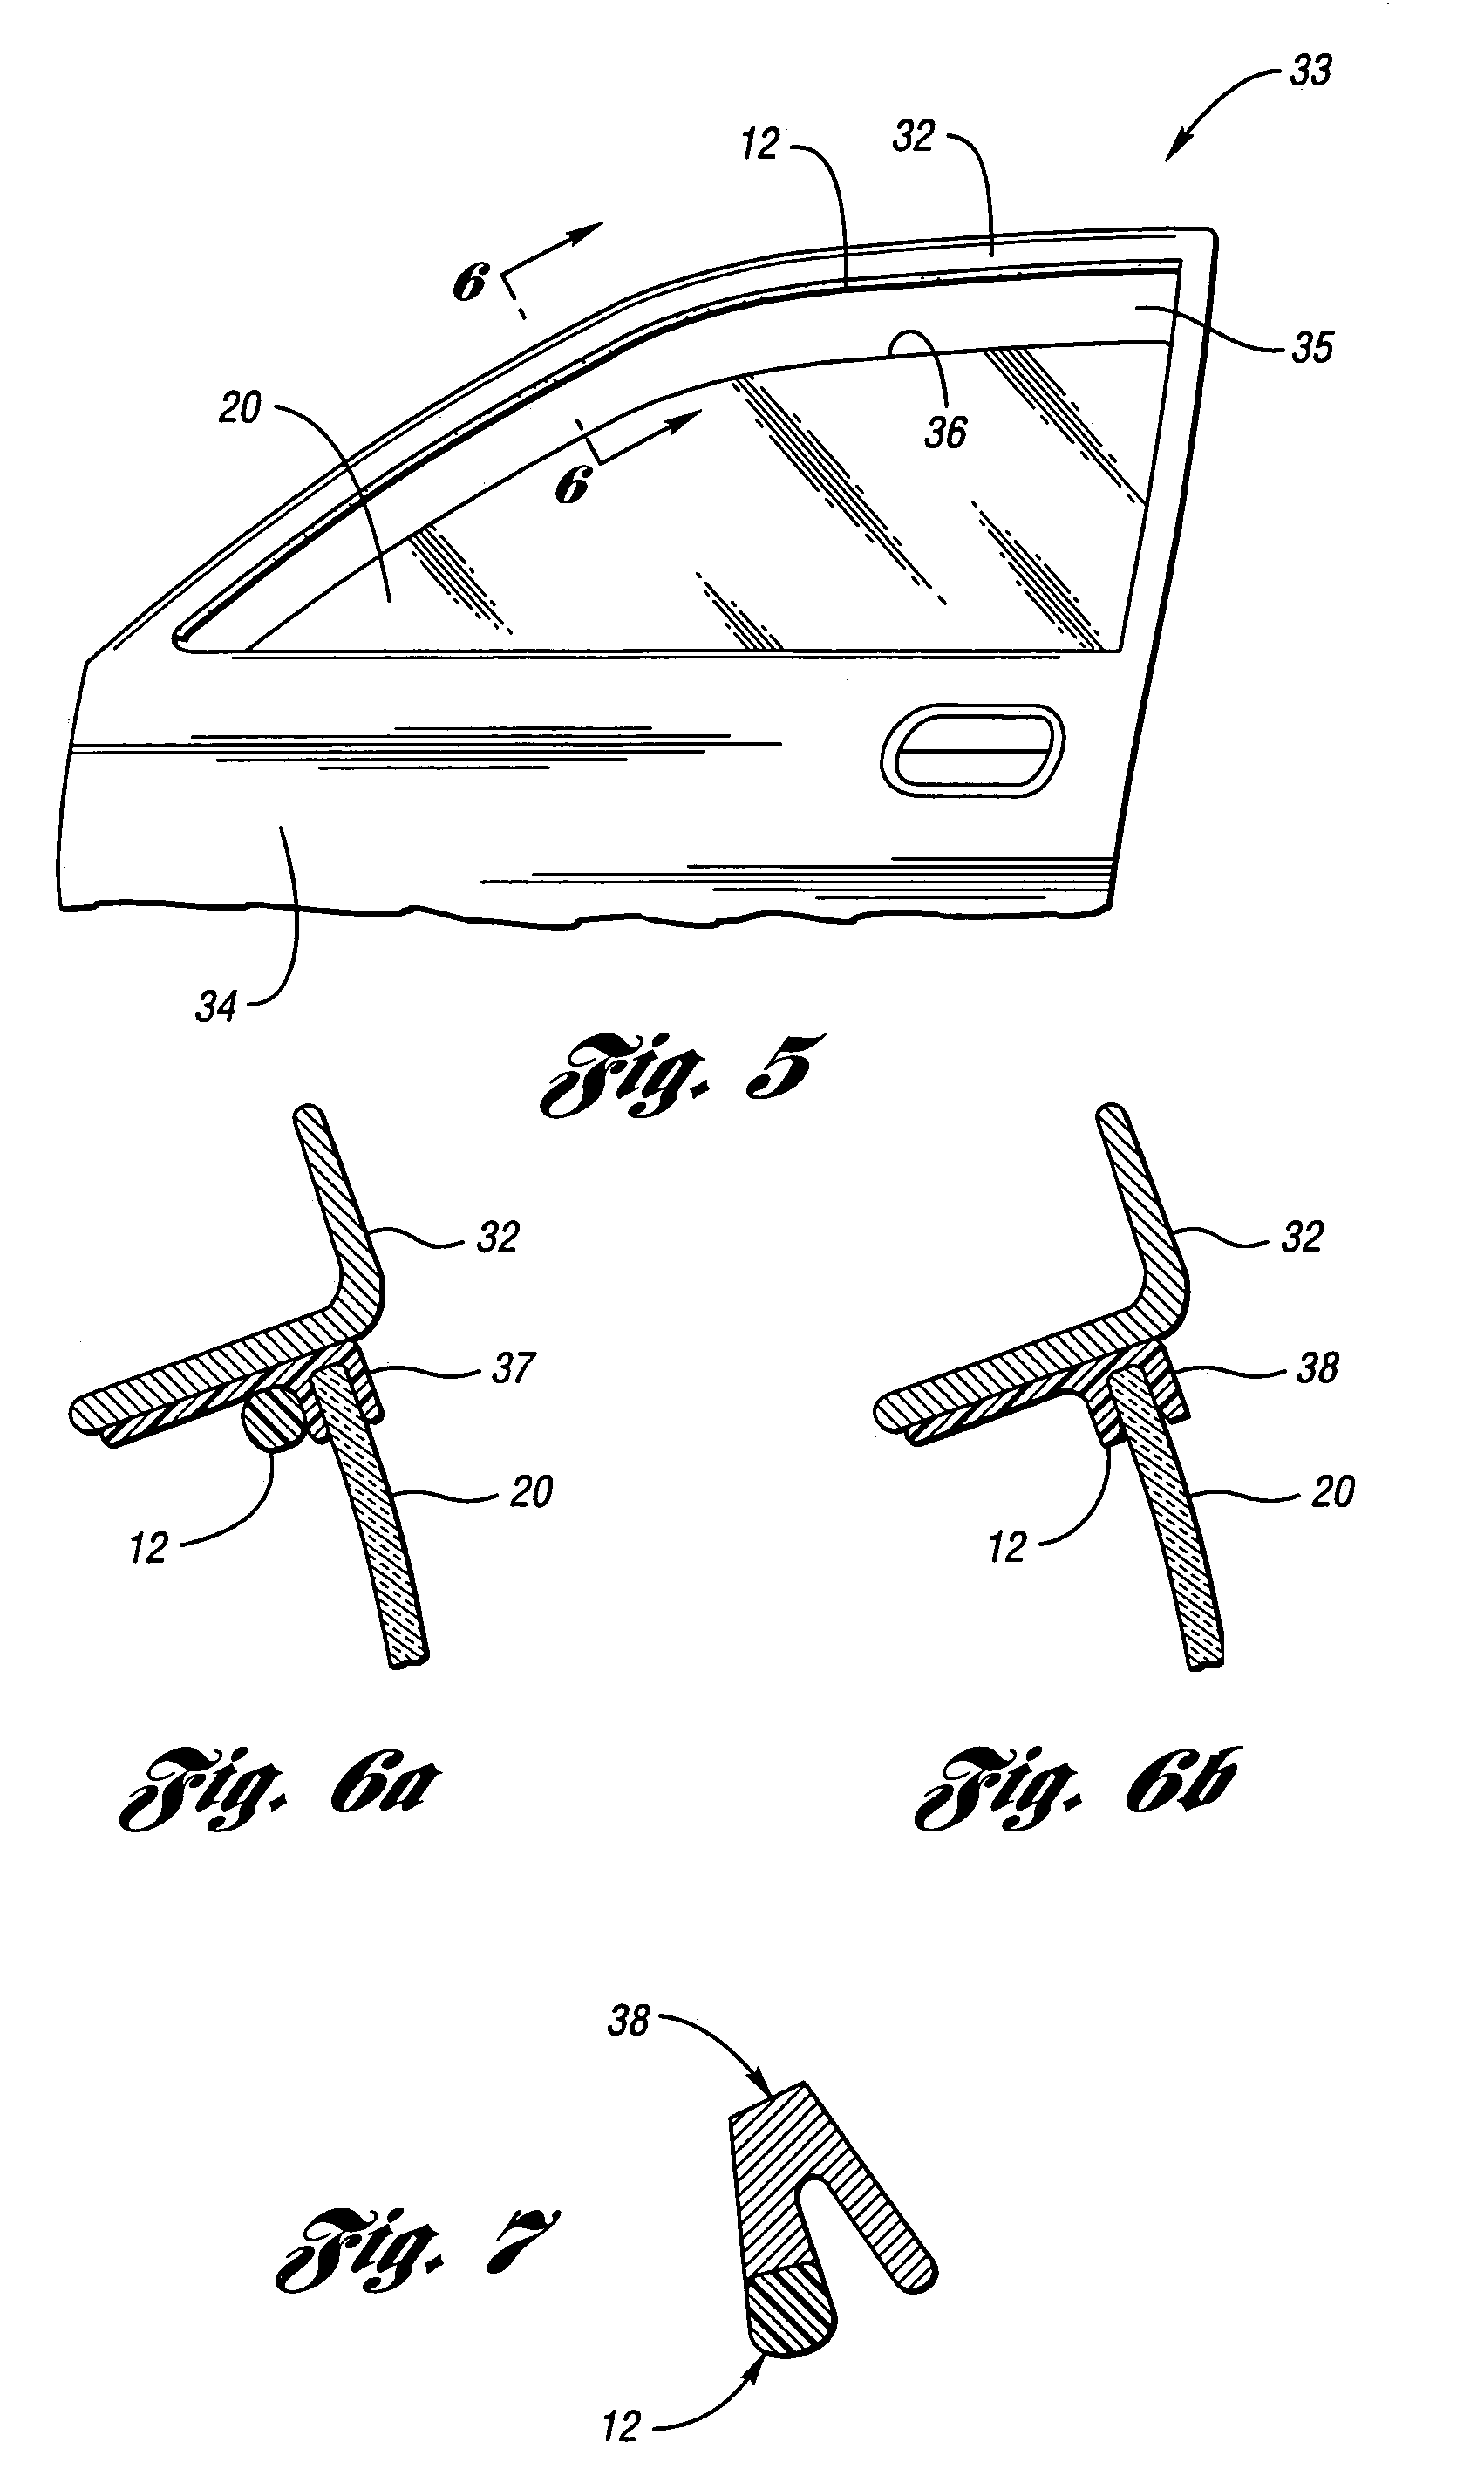 Anti-entrapment systems for preventing objects from being entrapped by translating devices